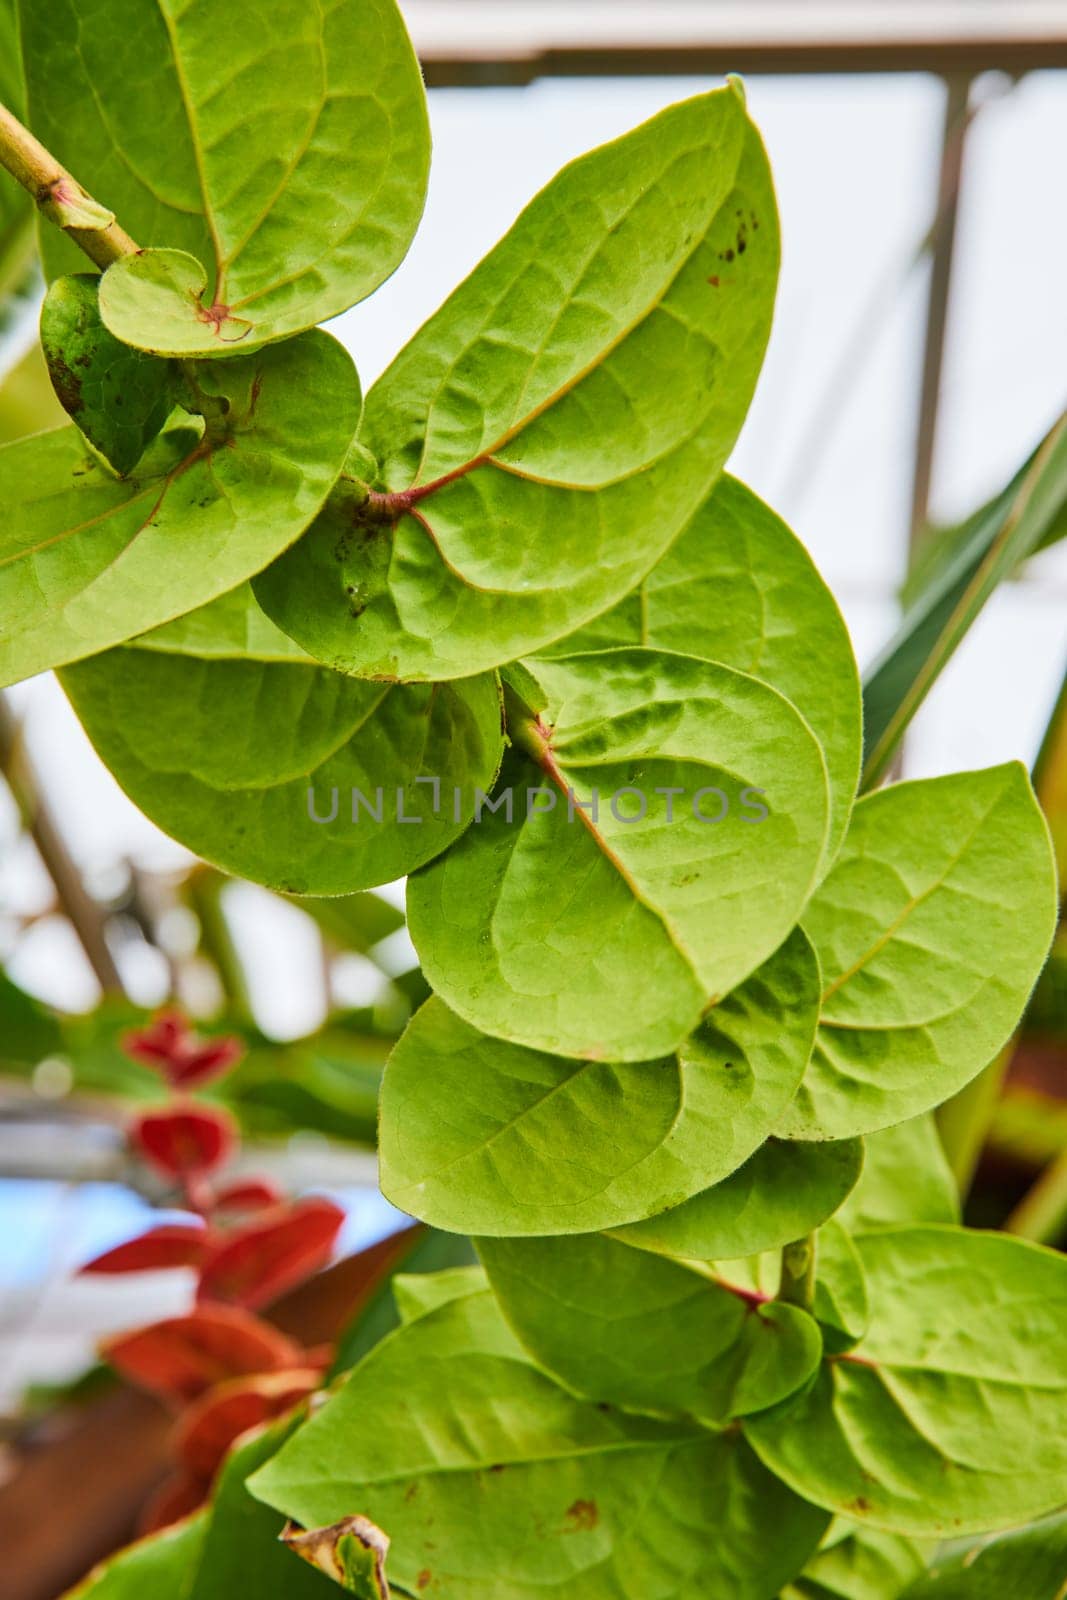 Vibrant Green Leaves Close-Up in Muncie Conservatory, Indiana - Embodying Growth and Green Living